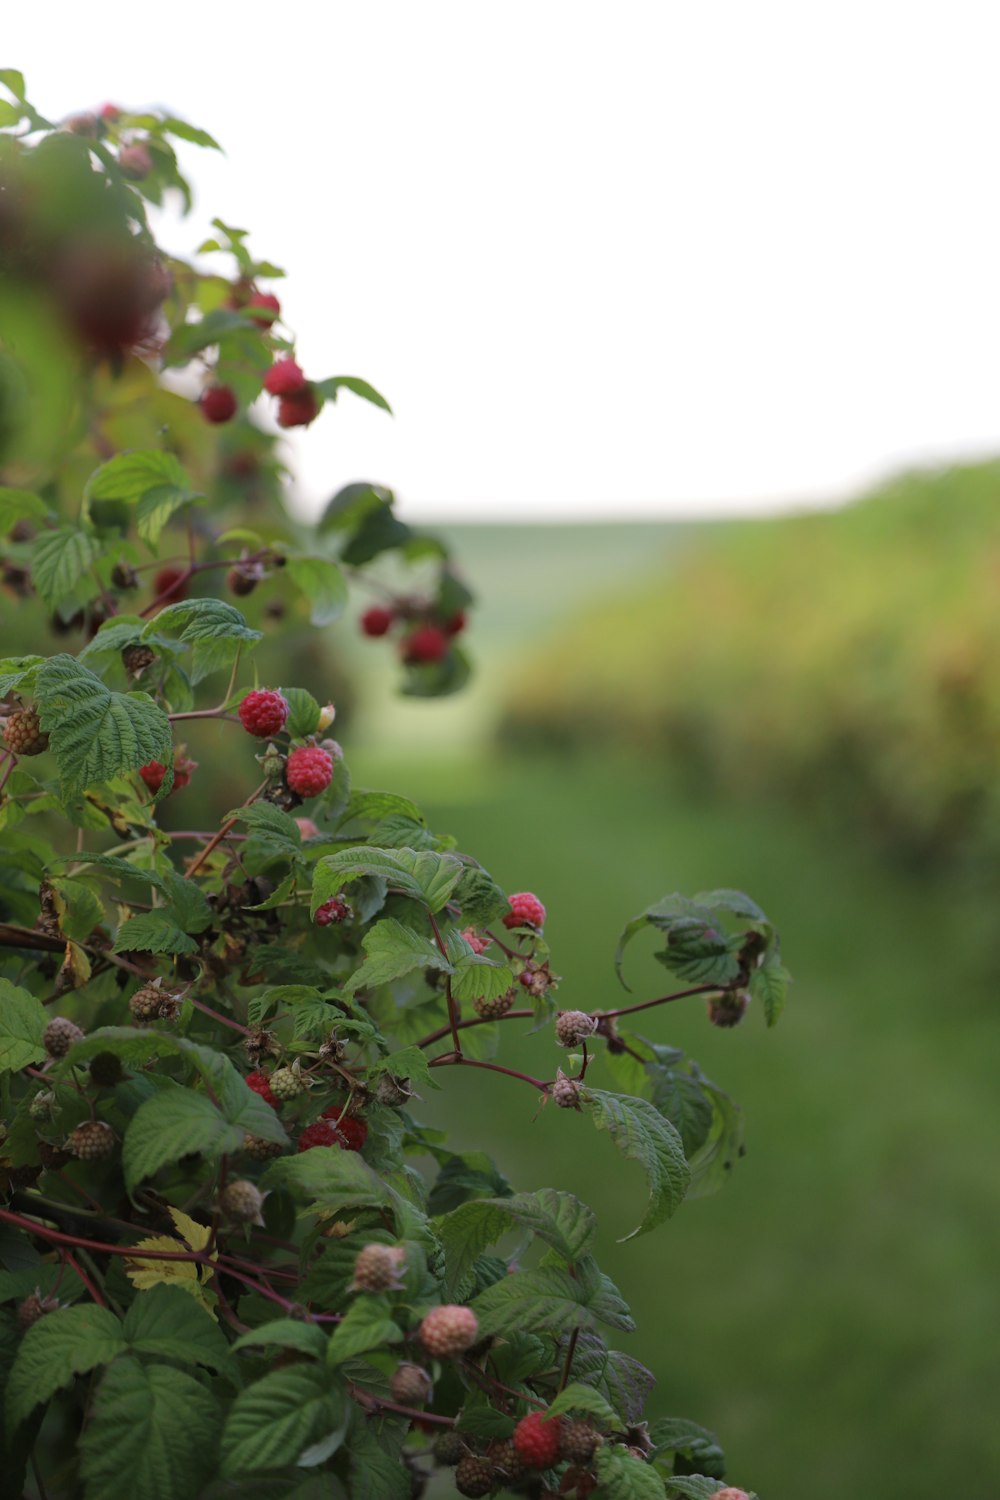 a bush with berries growing on it in a field